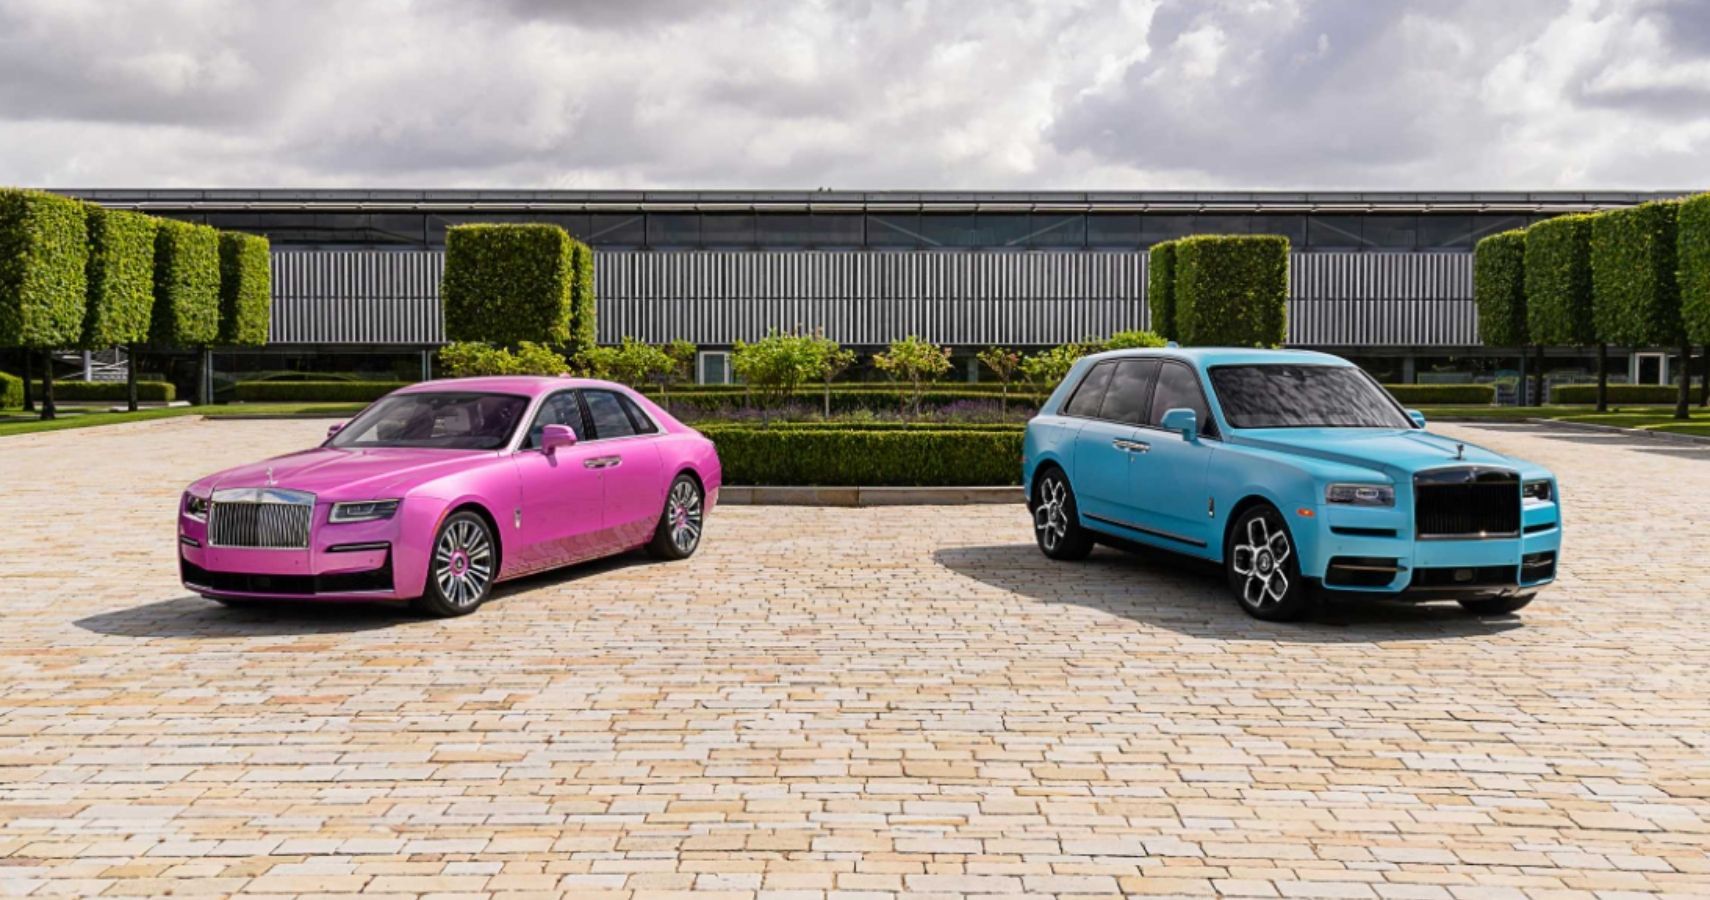 Rolls Royce Reveals Ghost Sedan And Cullinan Suv In Pink And Blue Colors